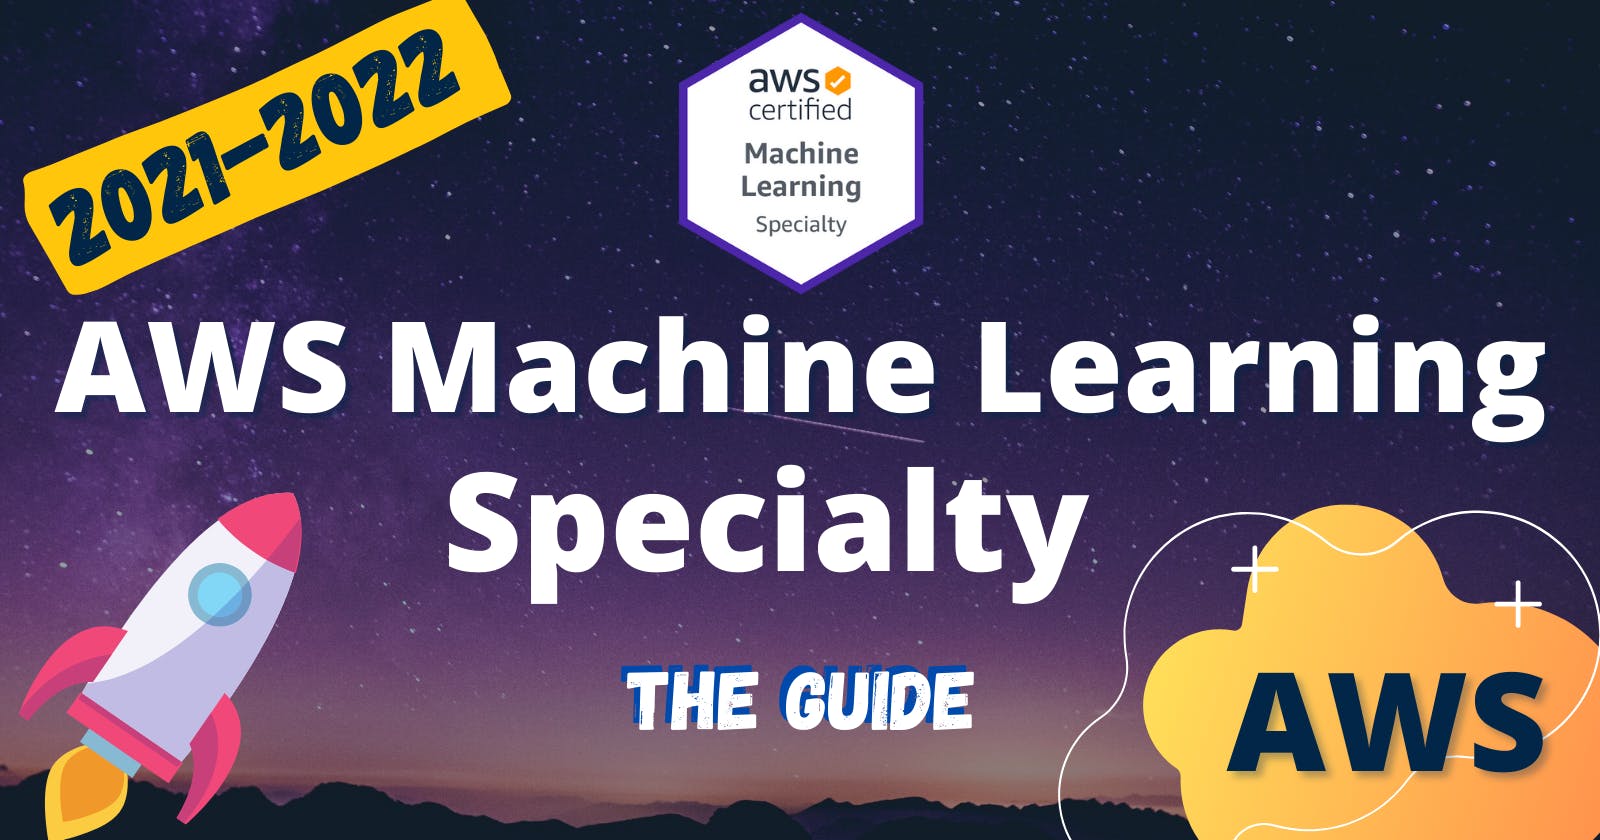 How I passed the AWS Machine Learning Specialty certification